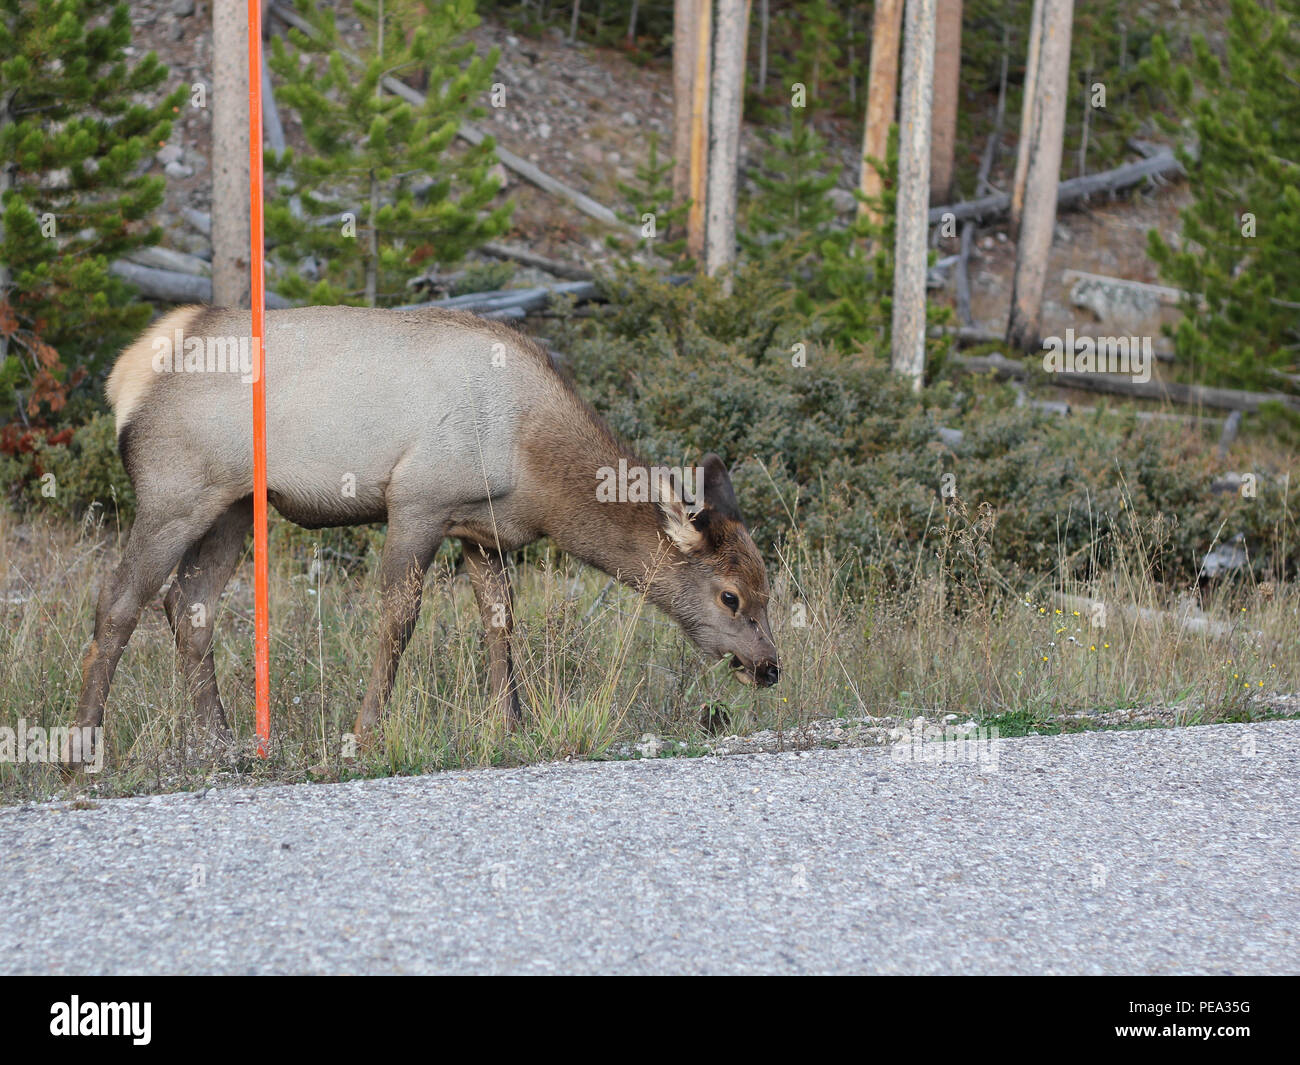 Wildlife Nature Photography Single Elk Mammal Game Cervus canadensis Yellowstone's Most Abundant Ungulate Grazing Green Forest Outdoor Background Stock Photo